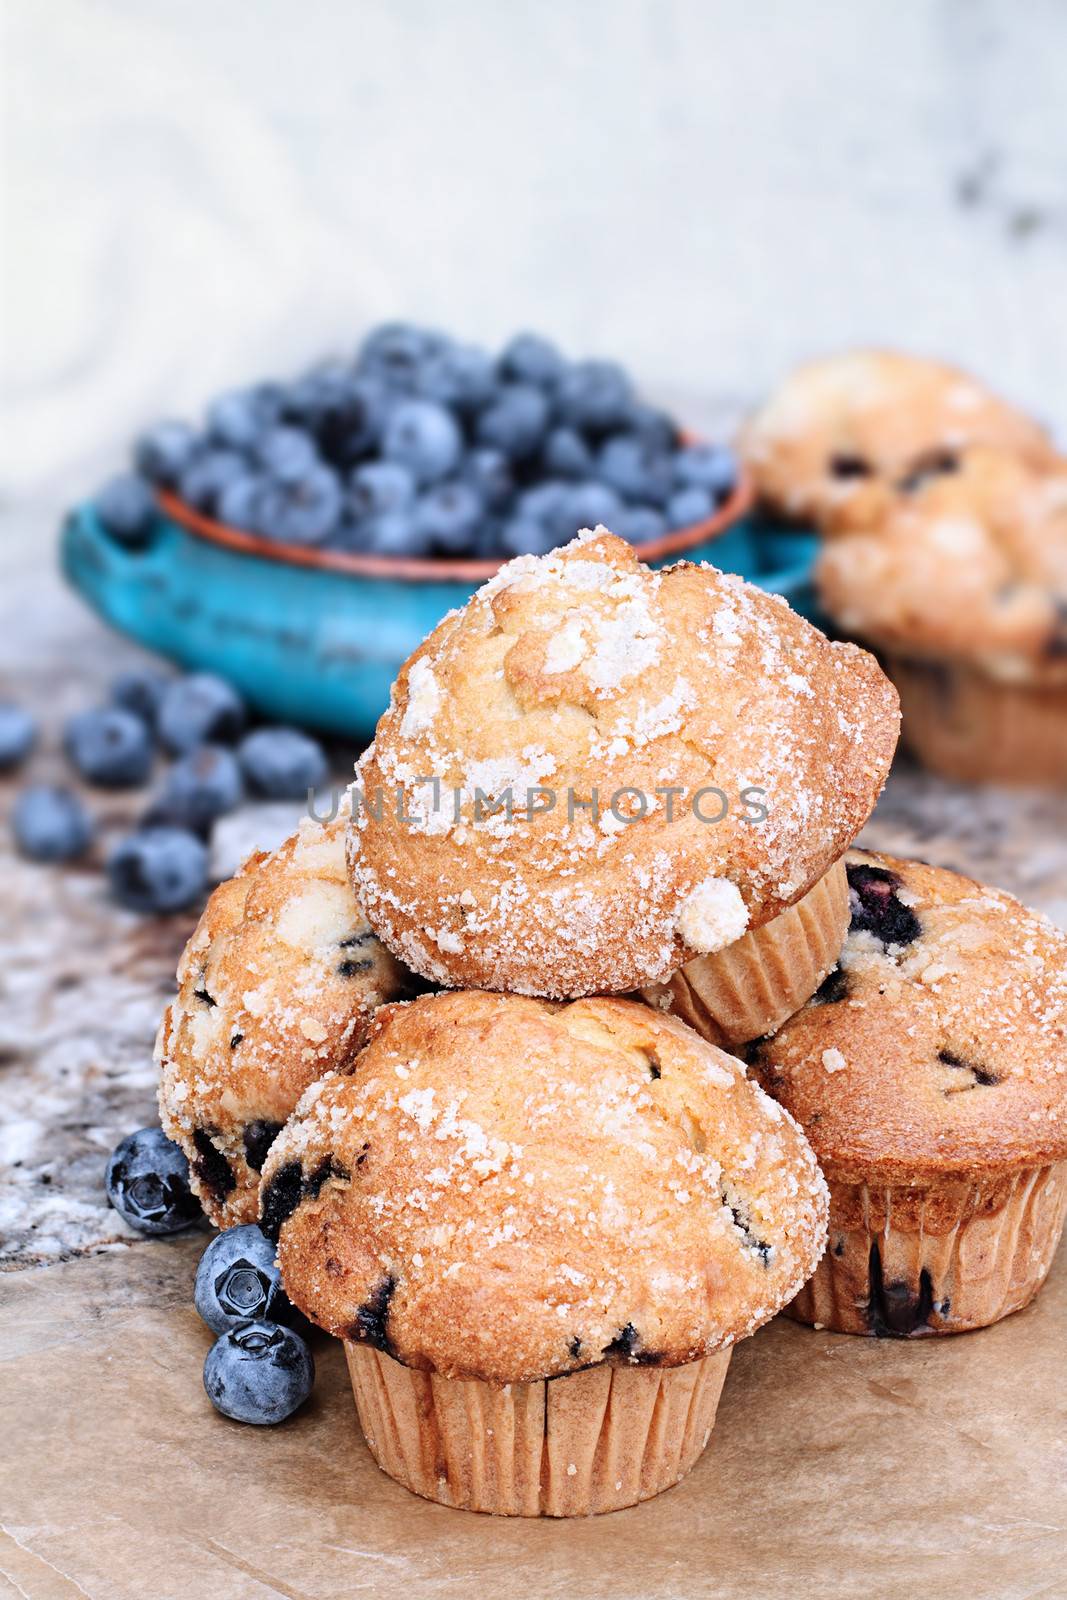 Blueberry Muffins and Fresh Berries by StephanieFrey